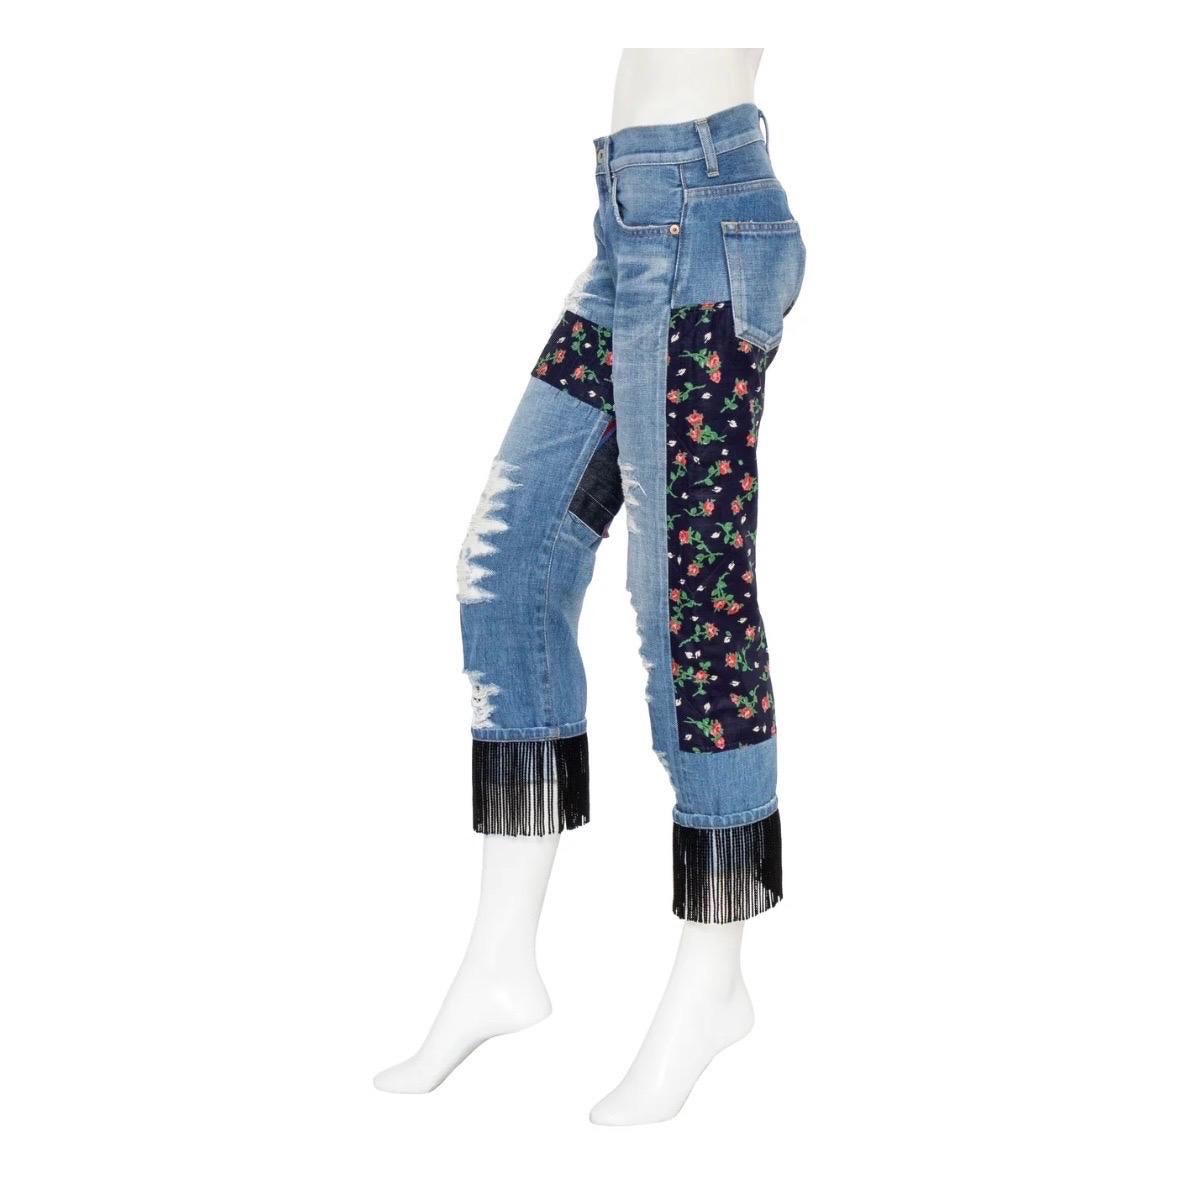 Fringed patchwork jeans by Junya Watanabe Comme des Garçon
2014 Collection
Ripped detailing
Patchwork with quilted florals and serape panels
Medium blue whiskered wash 
5-pocket construction
Low rise
Crop leg with fringe cuff
Materials: 100% cotton;